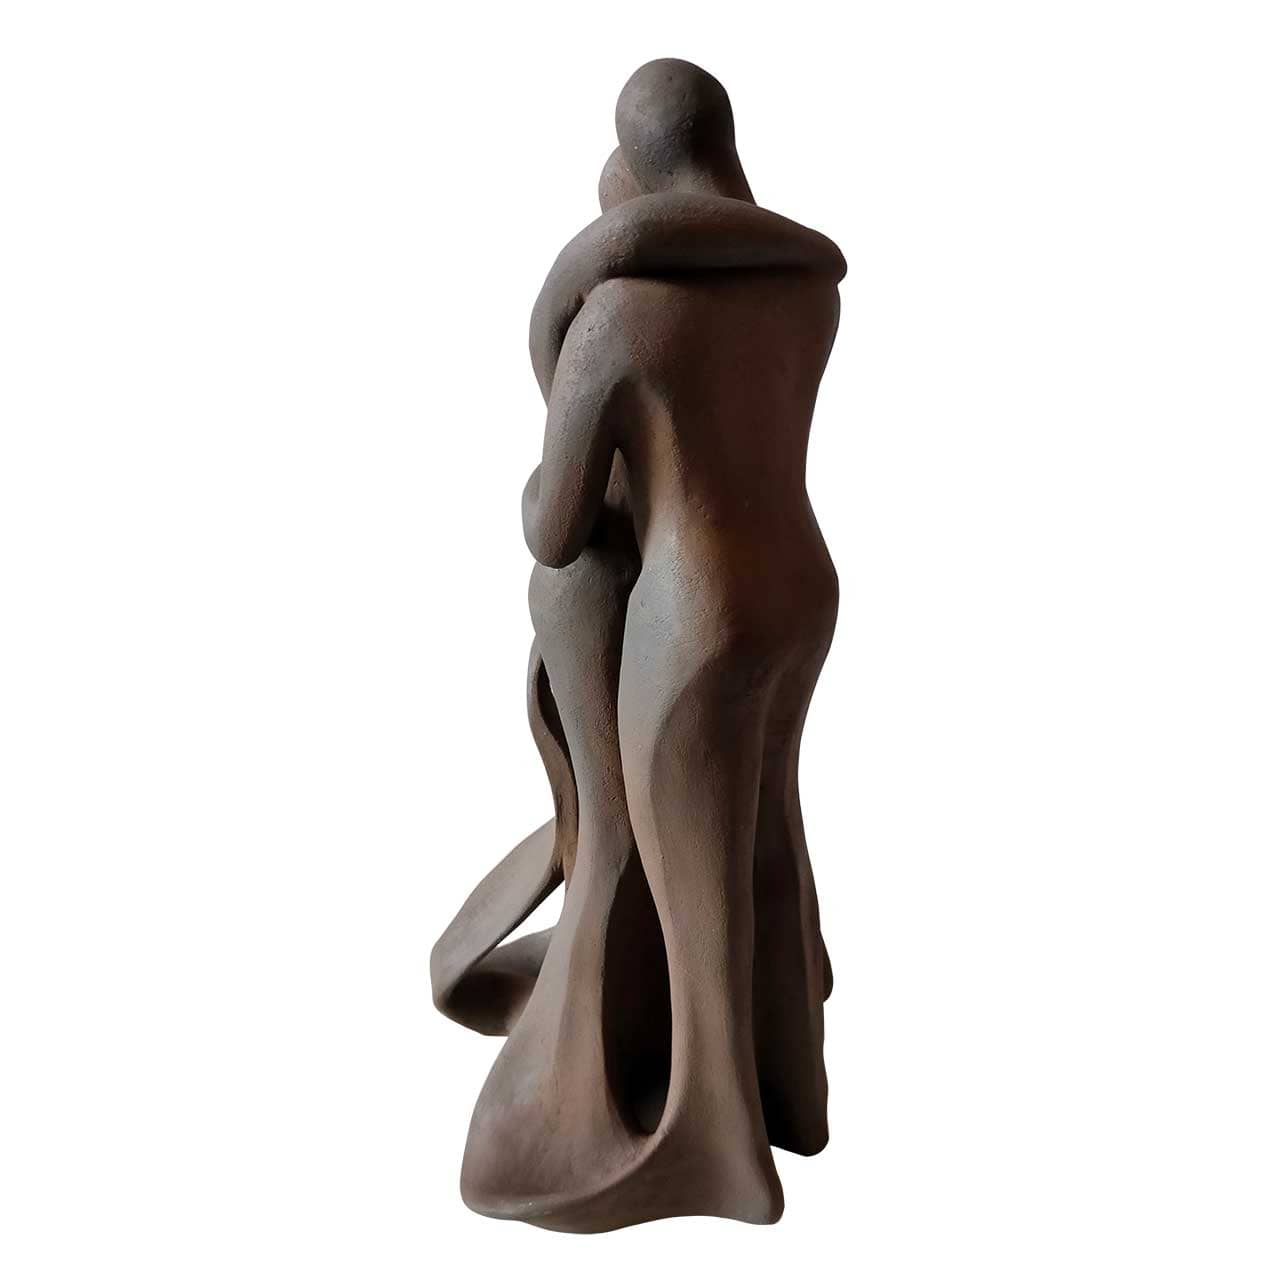 Metamorphosis 25 Stand by me sculpture collection 2021
Denise Gemin author
view 02